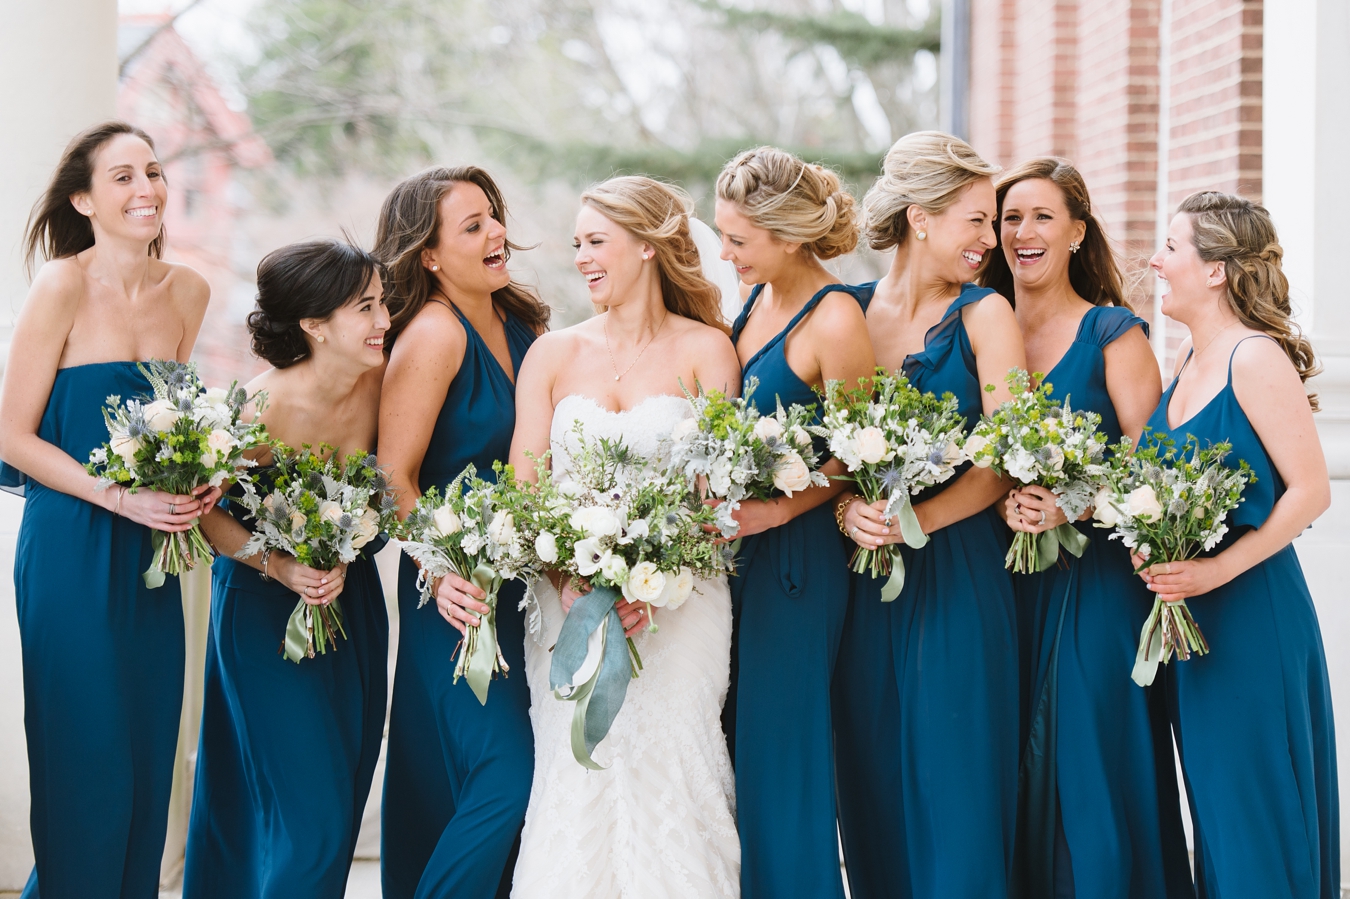 Royal Blue Bridesmaids Dresses and Organic Bouquets by Annapolis Wedding Ph...